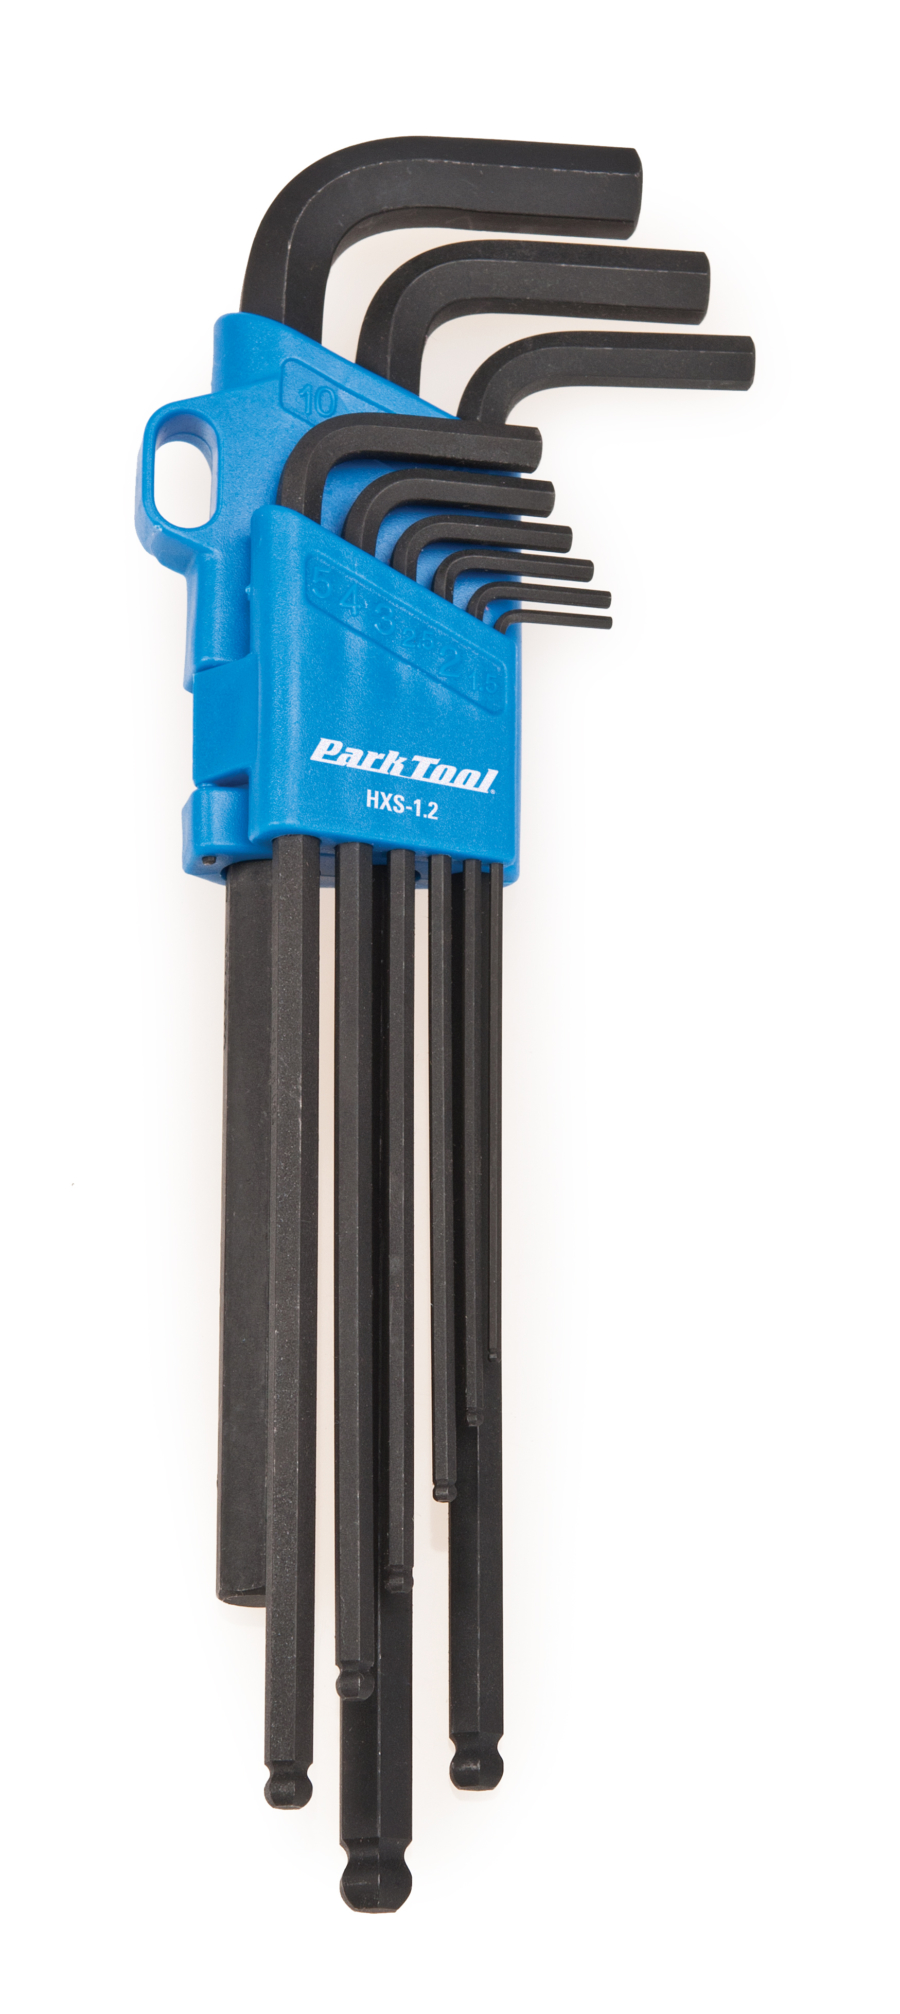 Park Tool HXS-1.2 Professional L-Shaped Hex Wrench Set, enlarged